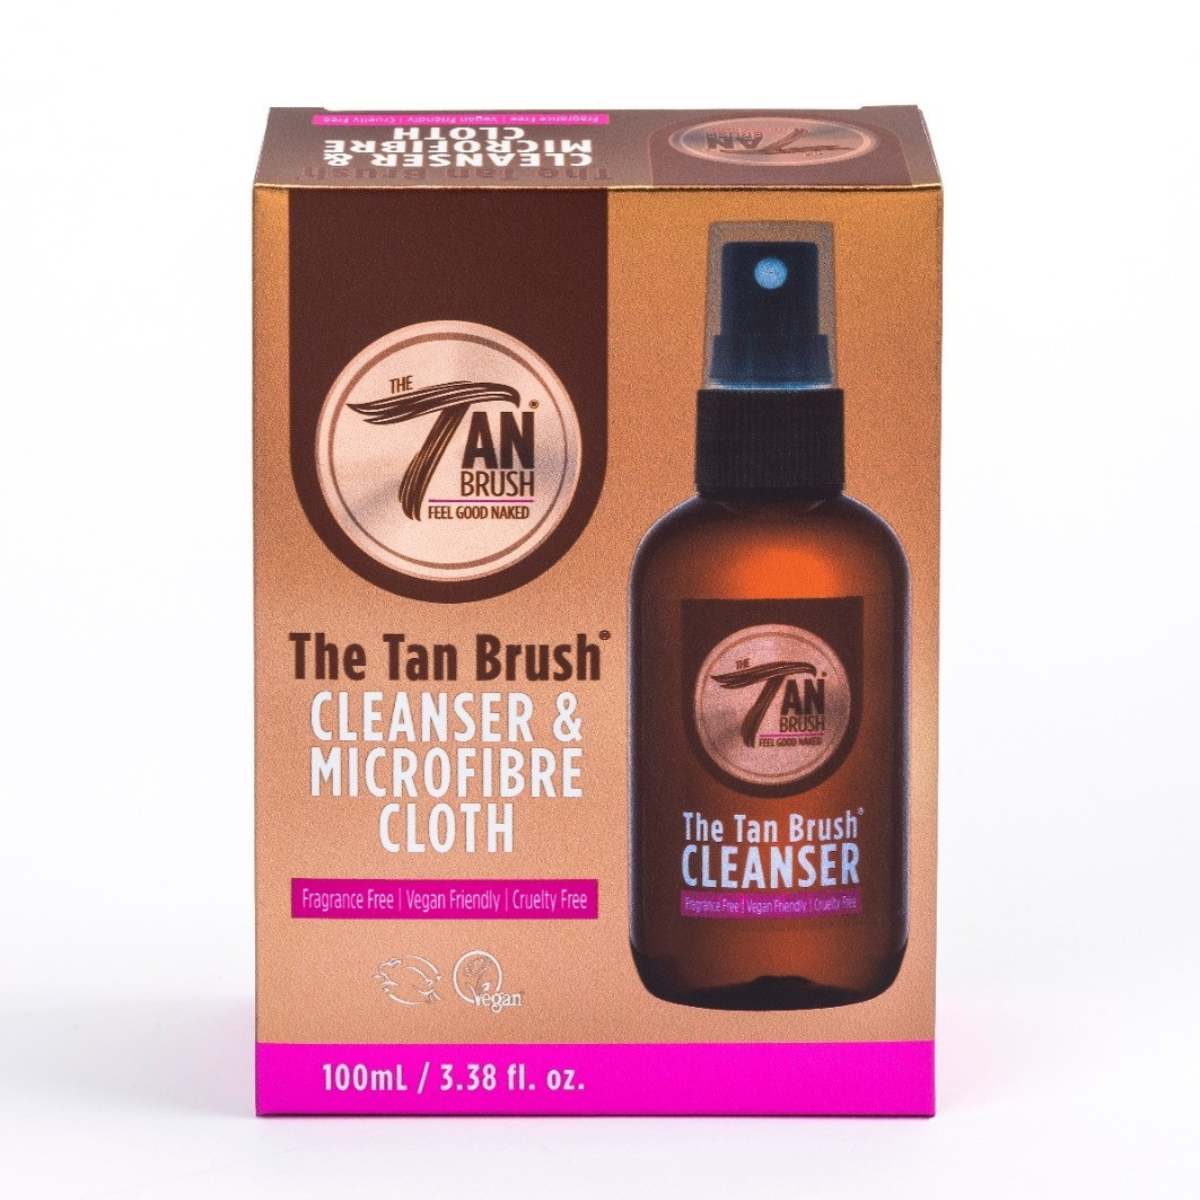 The Tan Brush Cleanser and Microfire Cloth